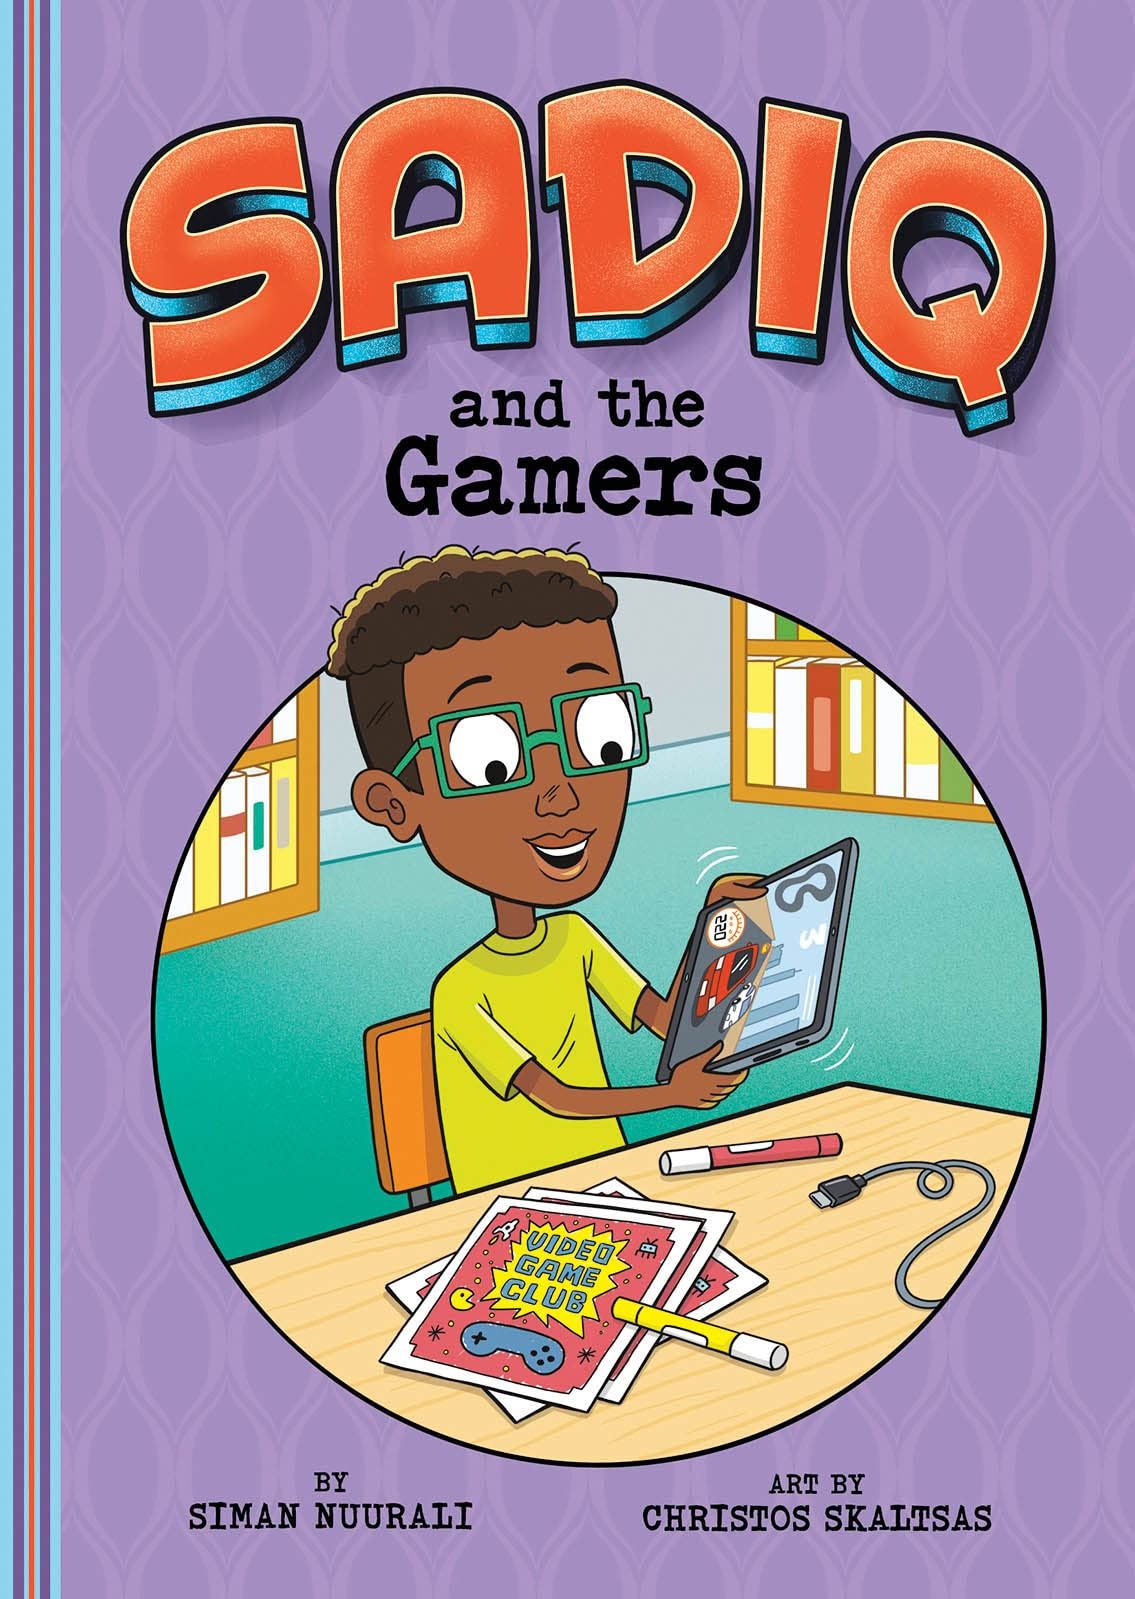 Sadiq and the gamers book cover